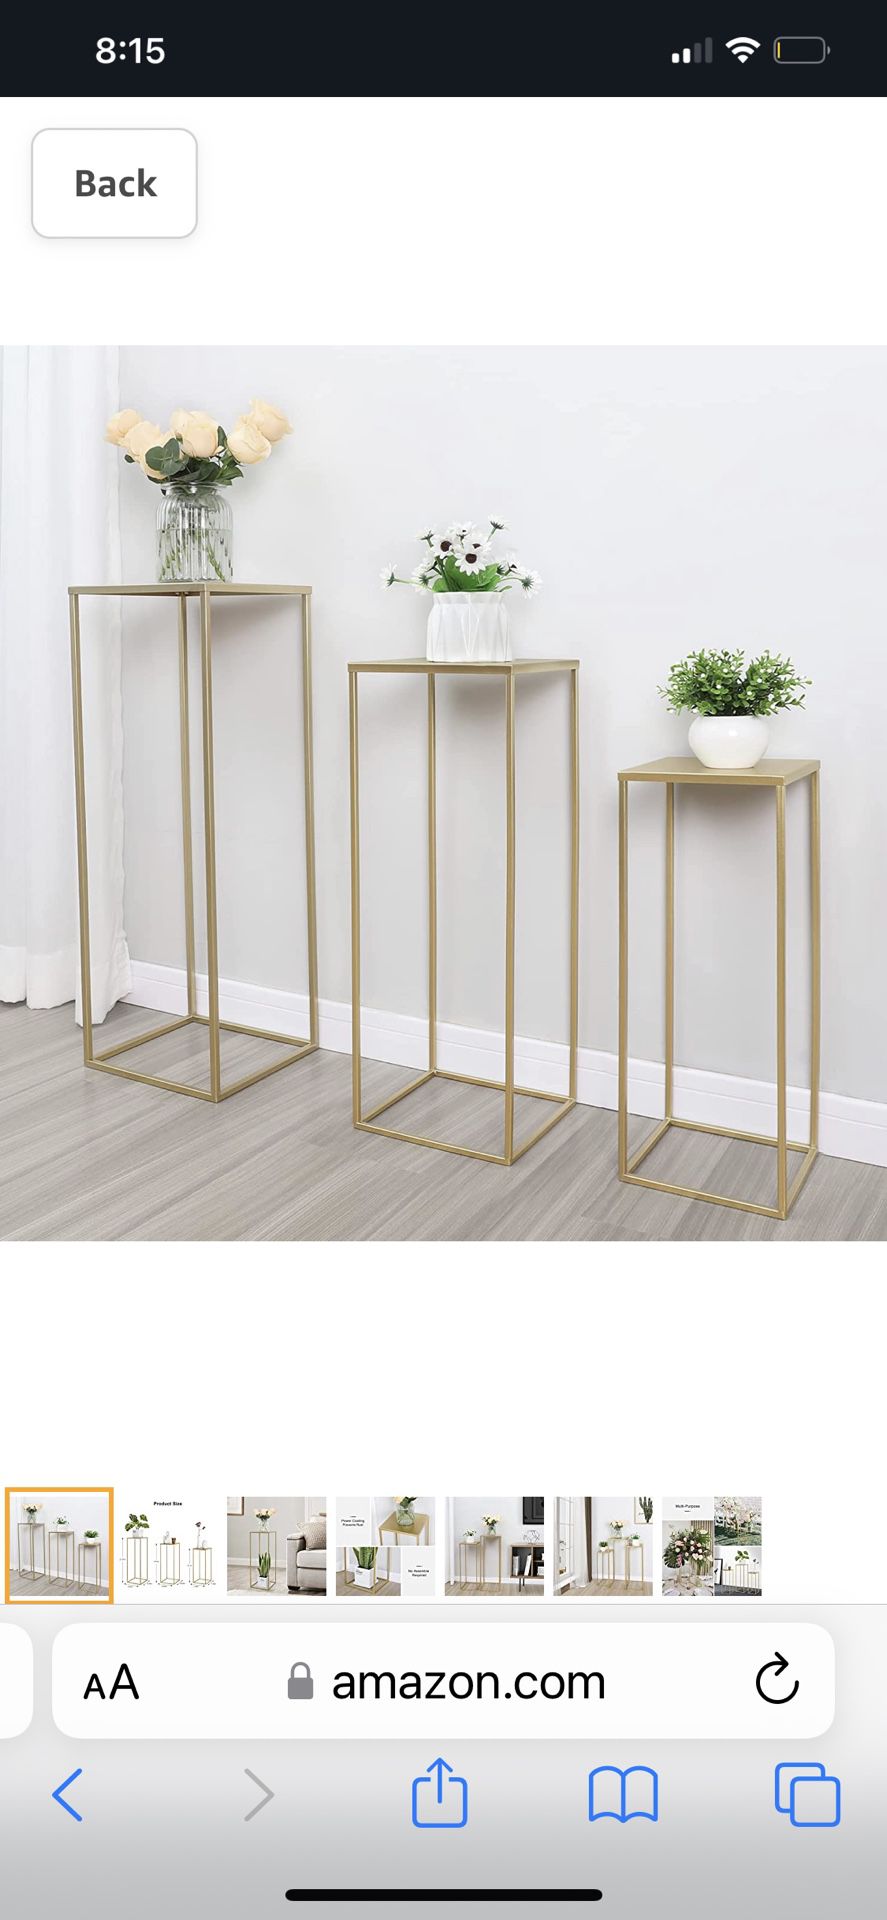 Gold Metal Stands Set Of 3 